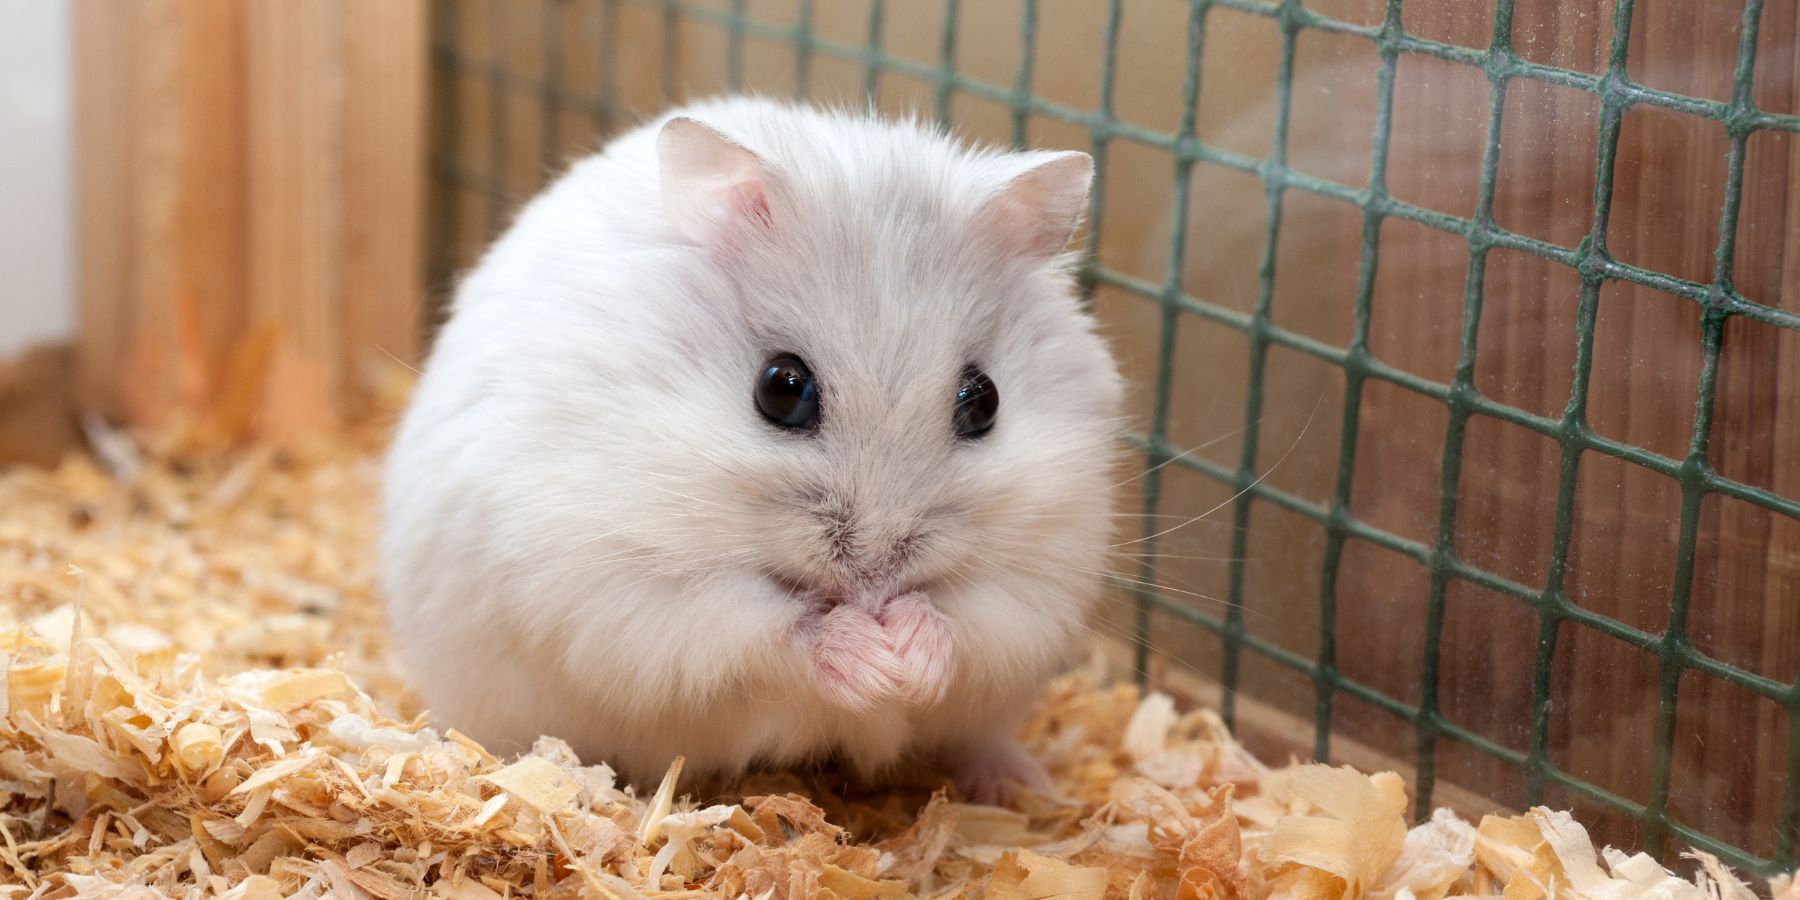 What Should You Do If Your Hamster Has Babies?